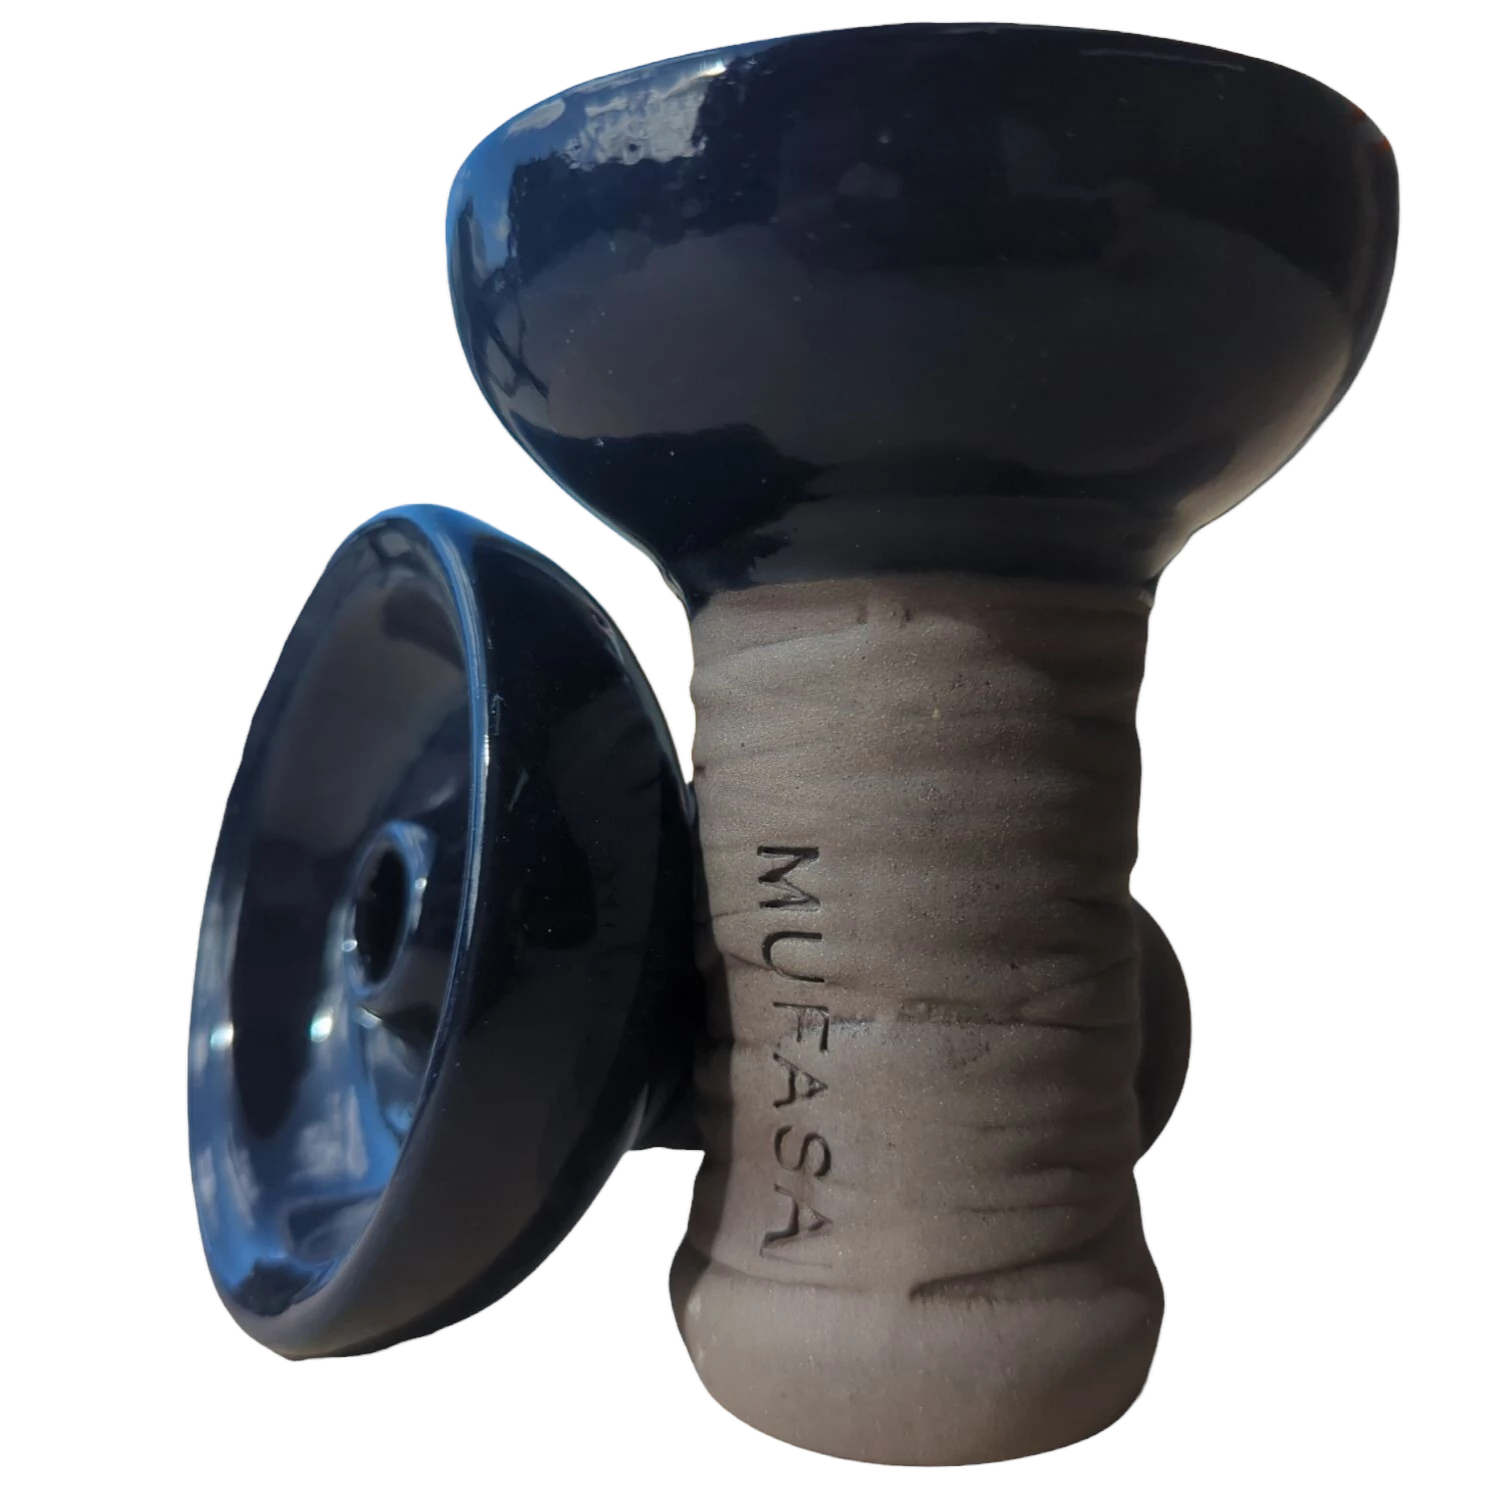 mufasa premium clay phunnel hookah bowl for hmd heat management fits all types of hookah one choice light line work with hmd and foil twe dark blue